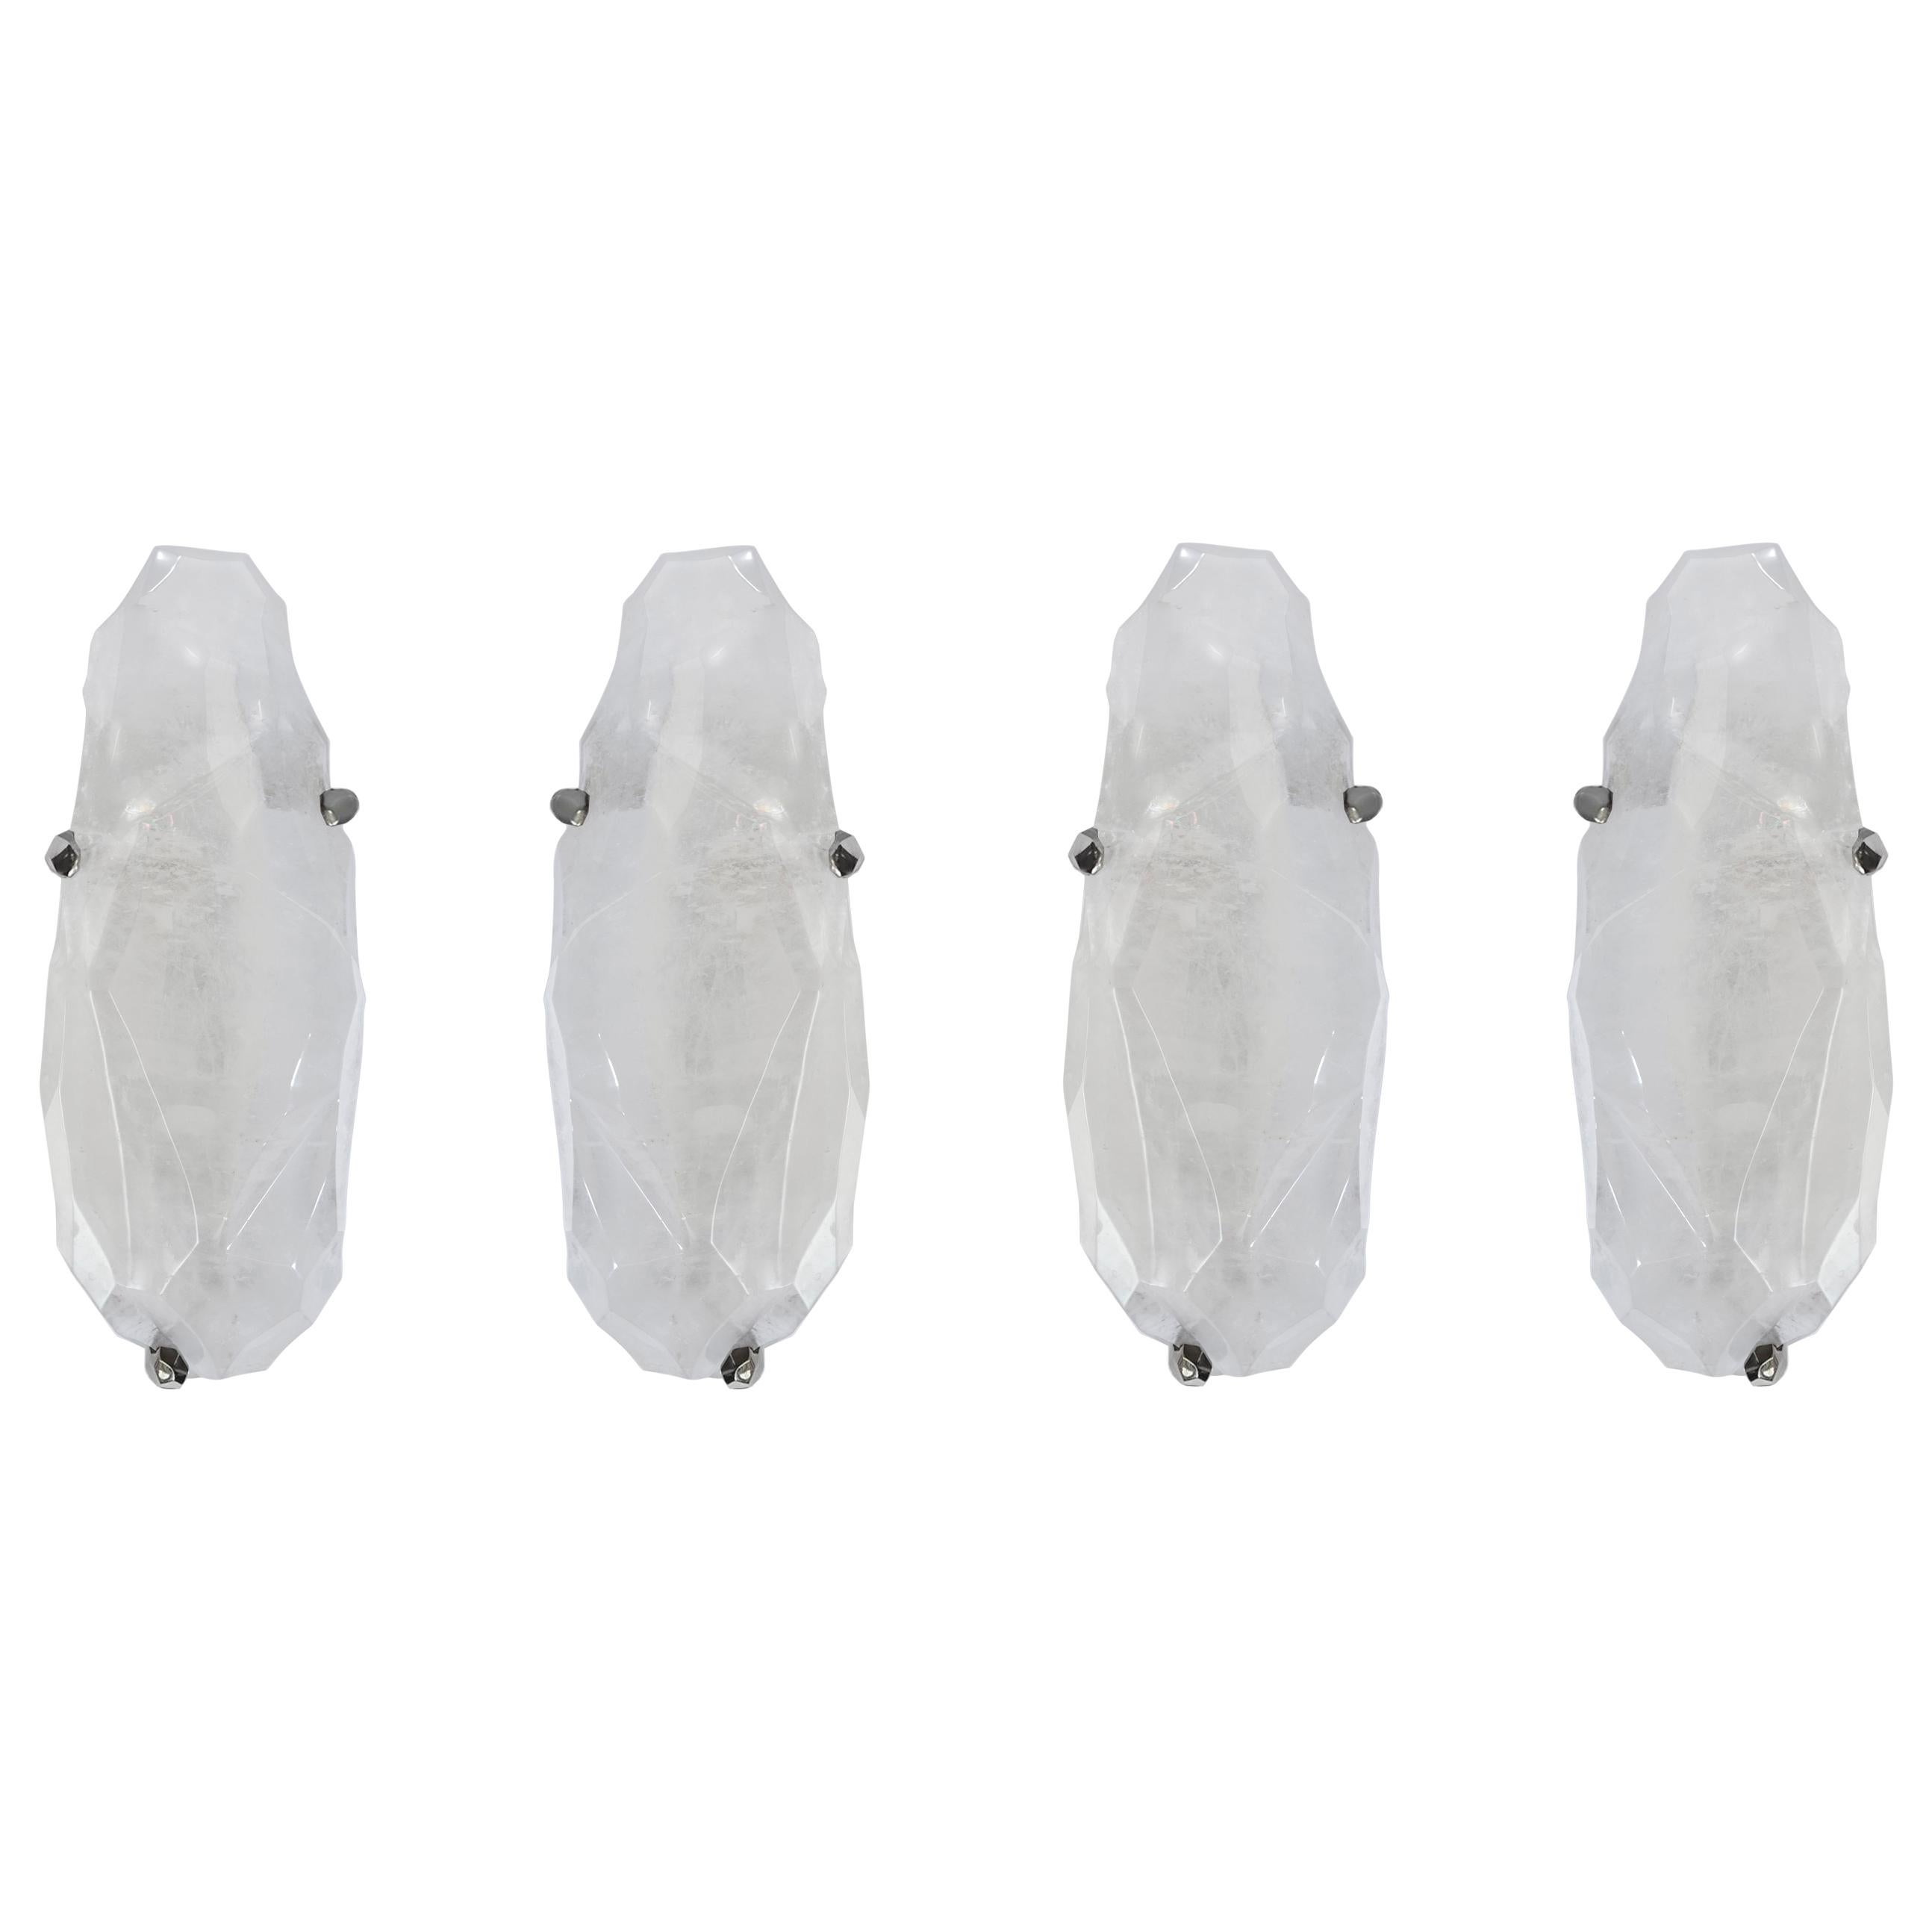 Group of Four SSW Rock Crystal Sconces by Phoenix